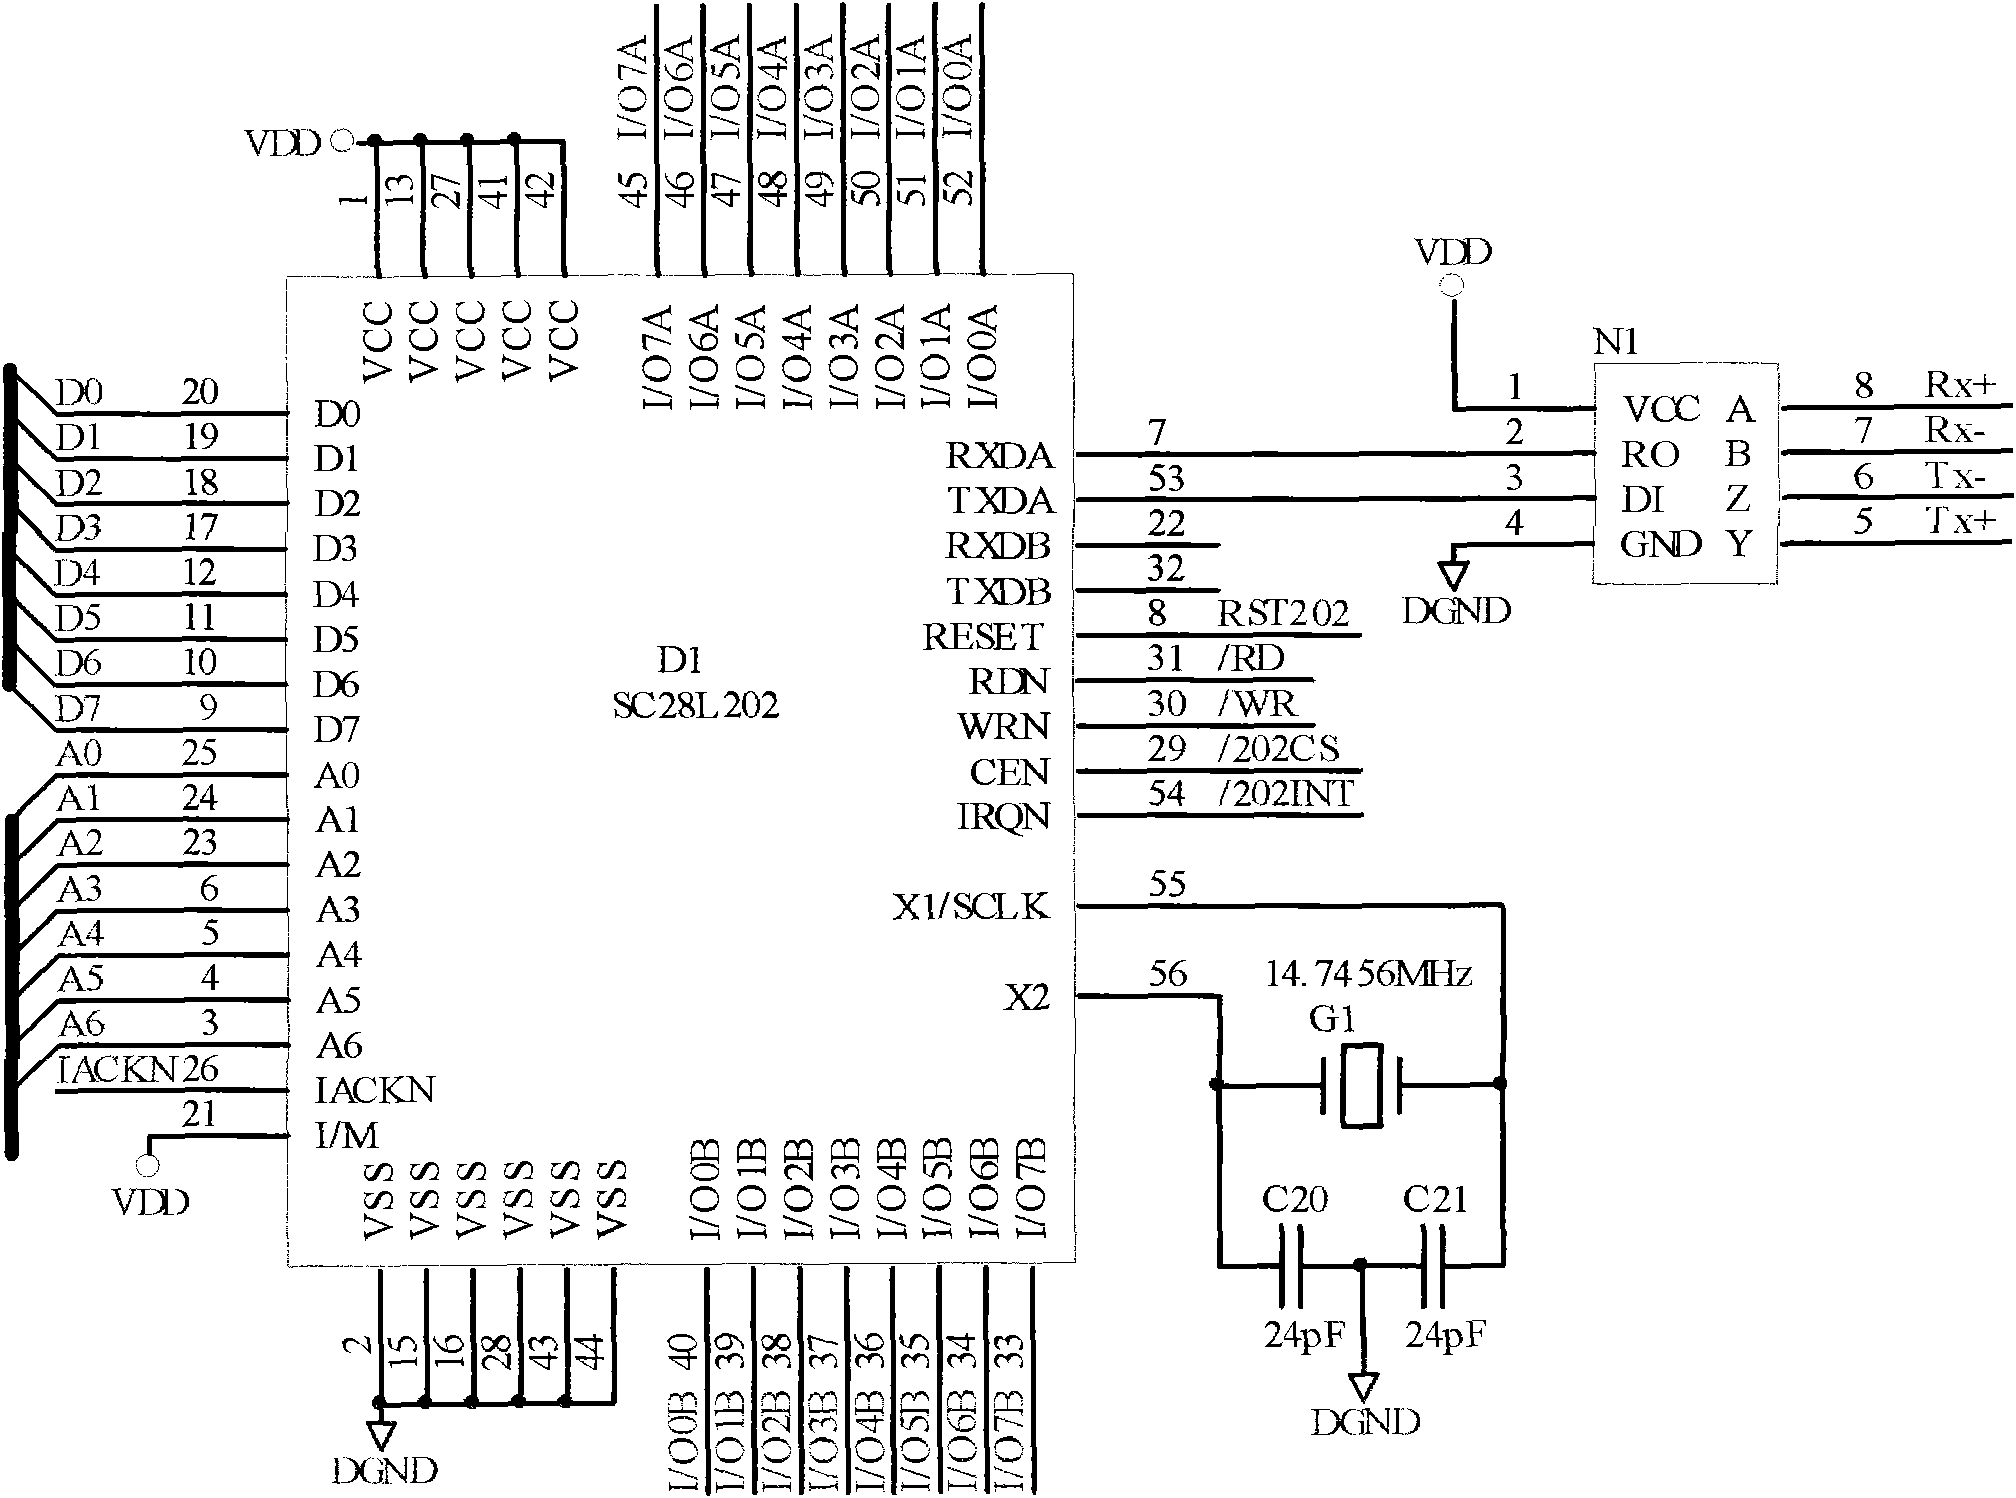 Universal serial port conversion and data acquisition card (DAC)